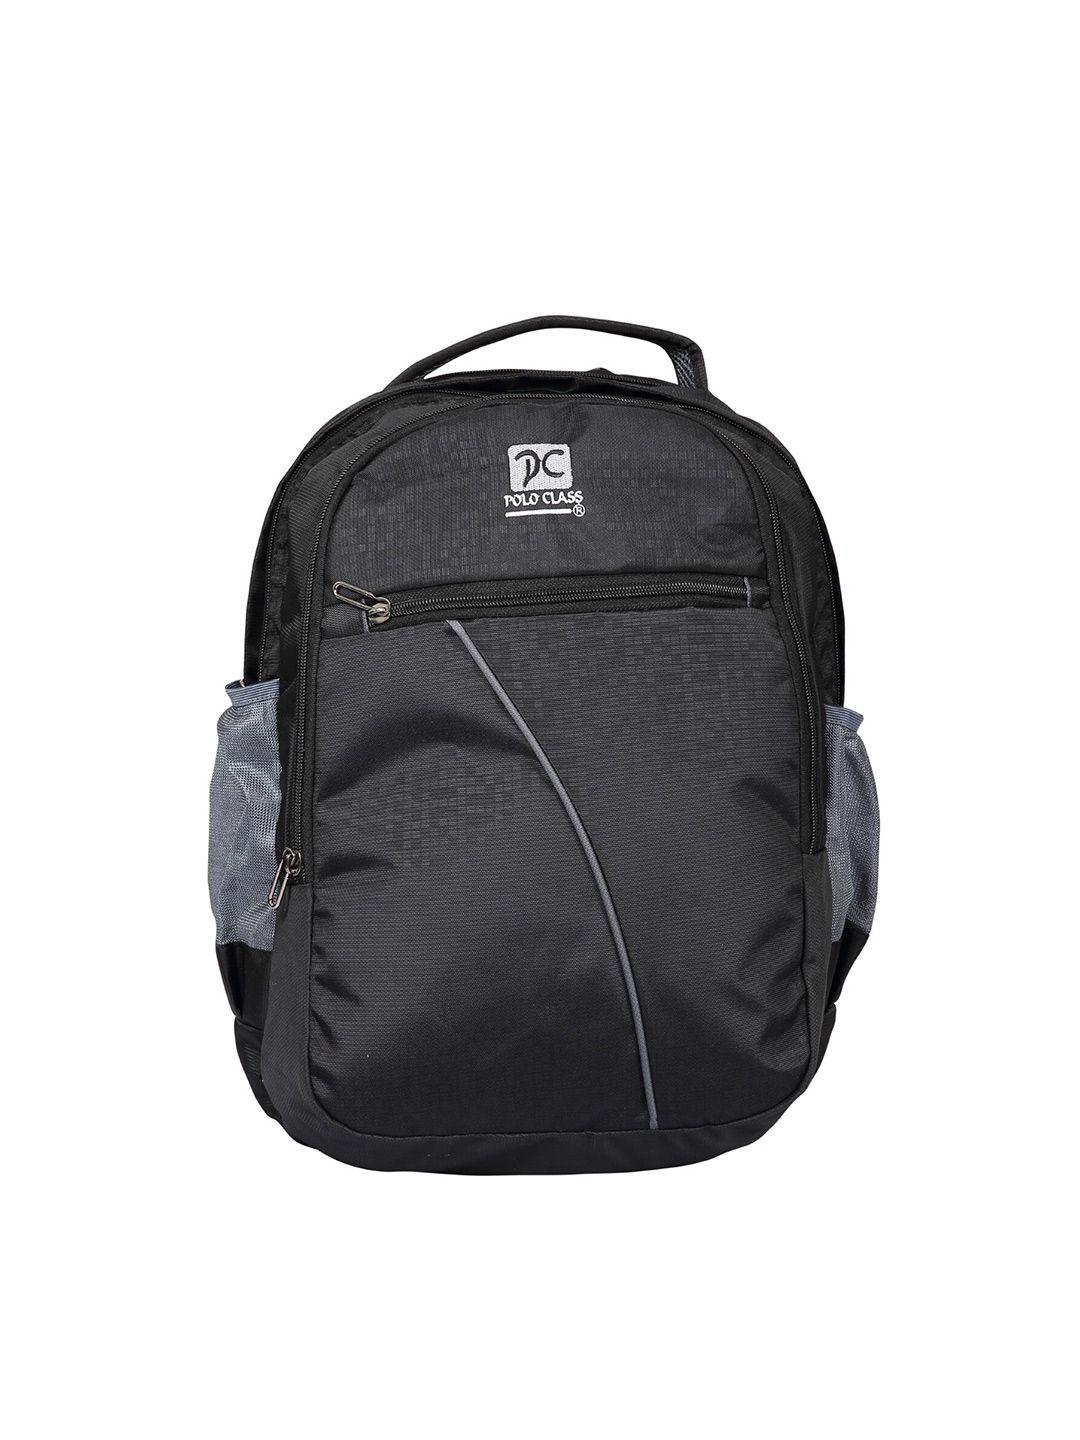 polo class laptop backpack